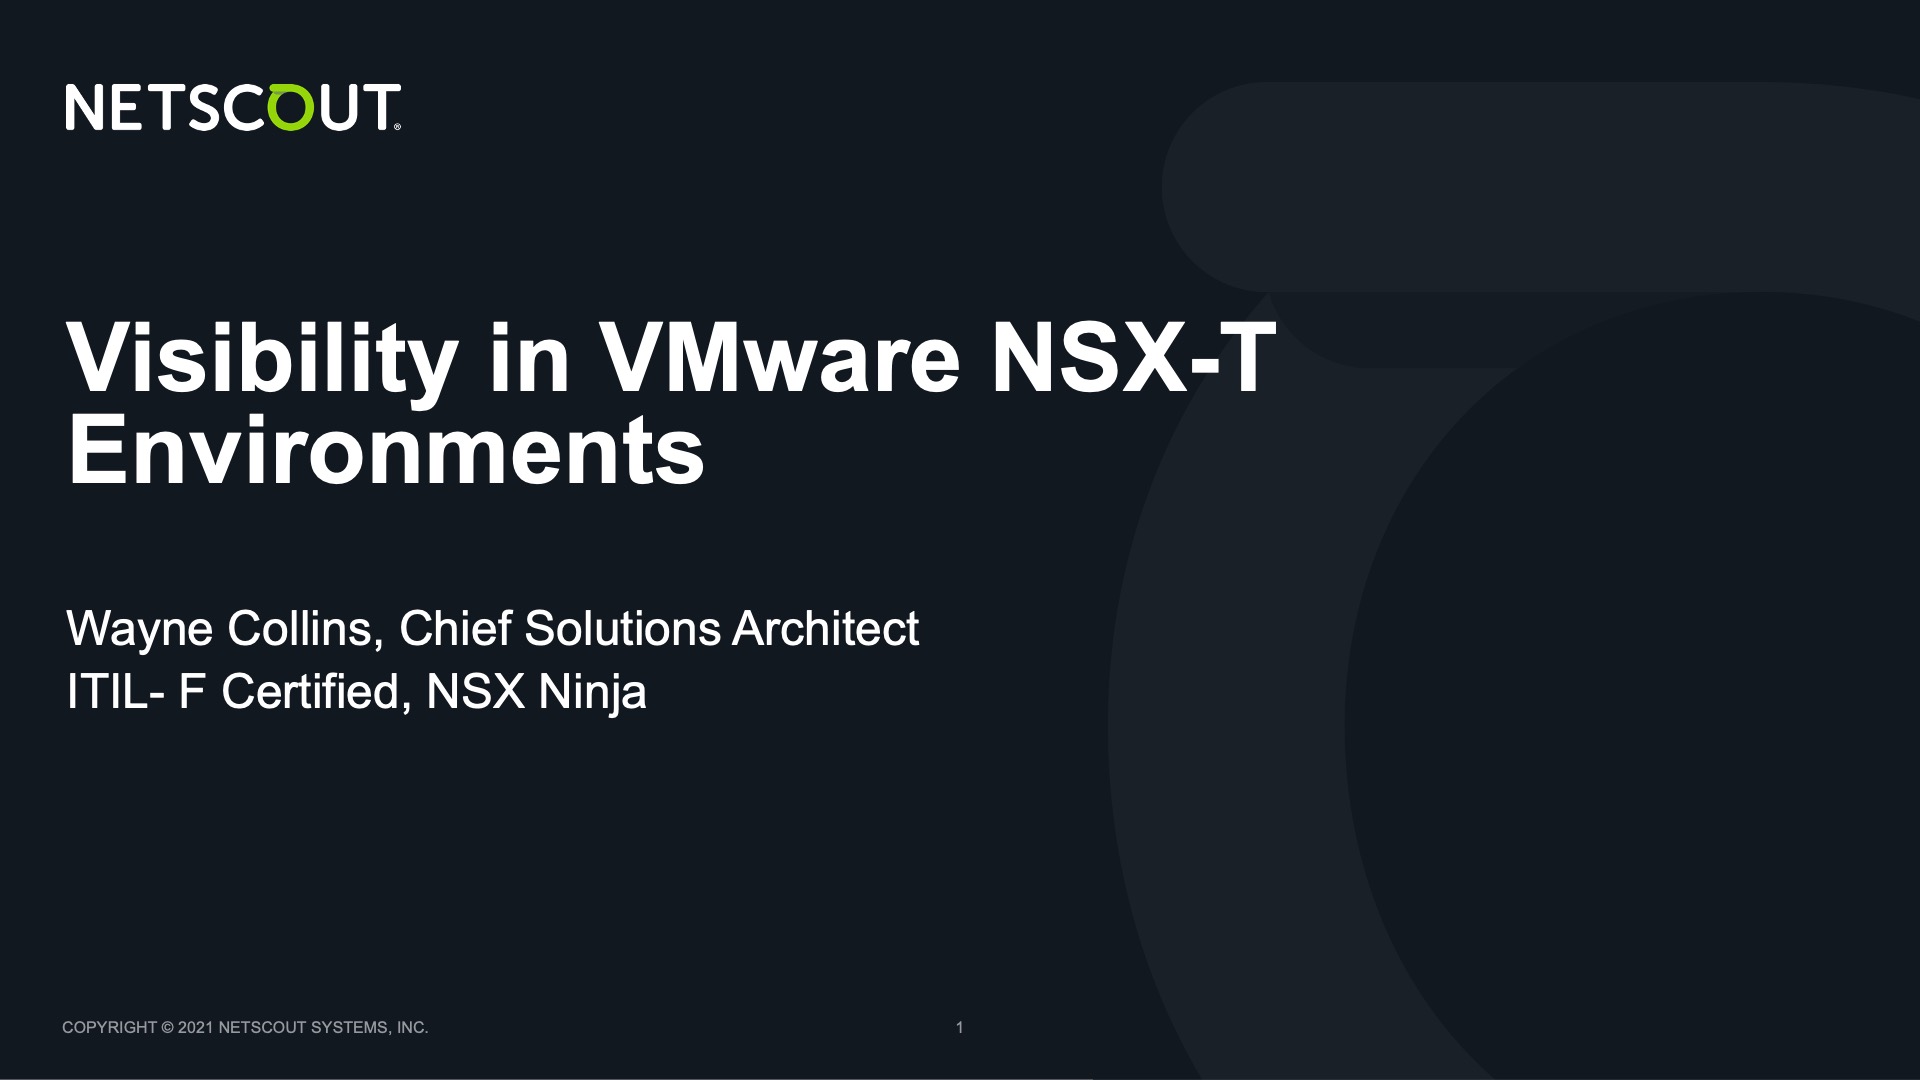 Visibility in VMware NSX-T Environments